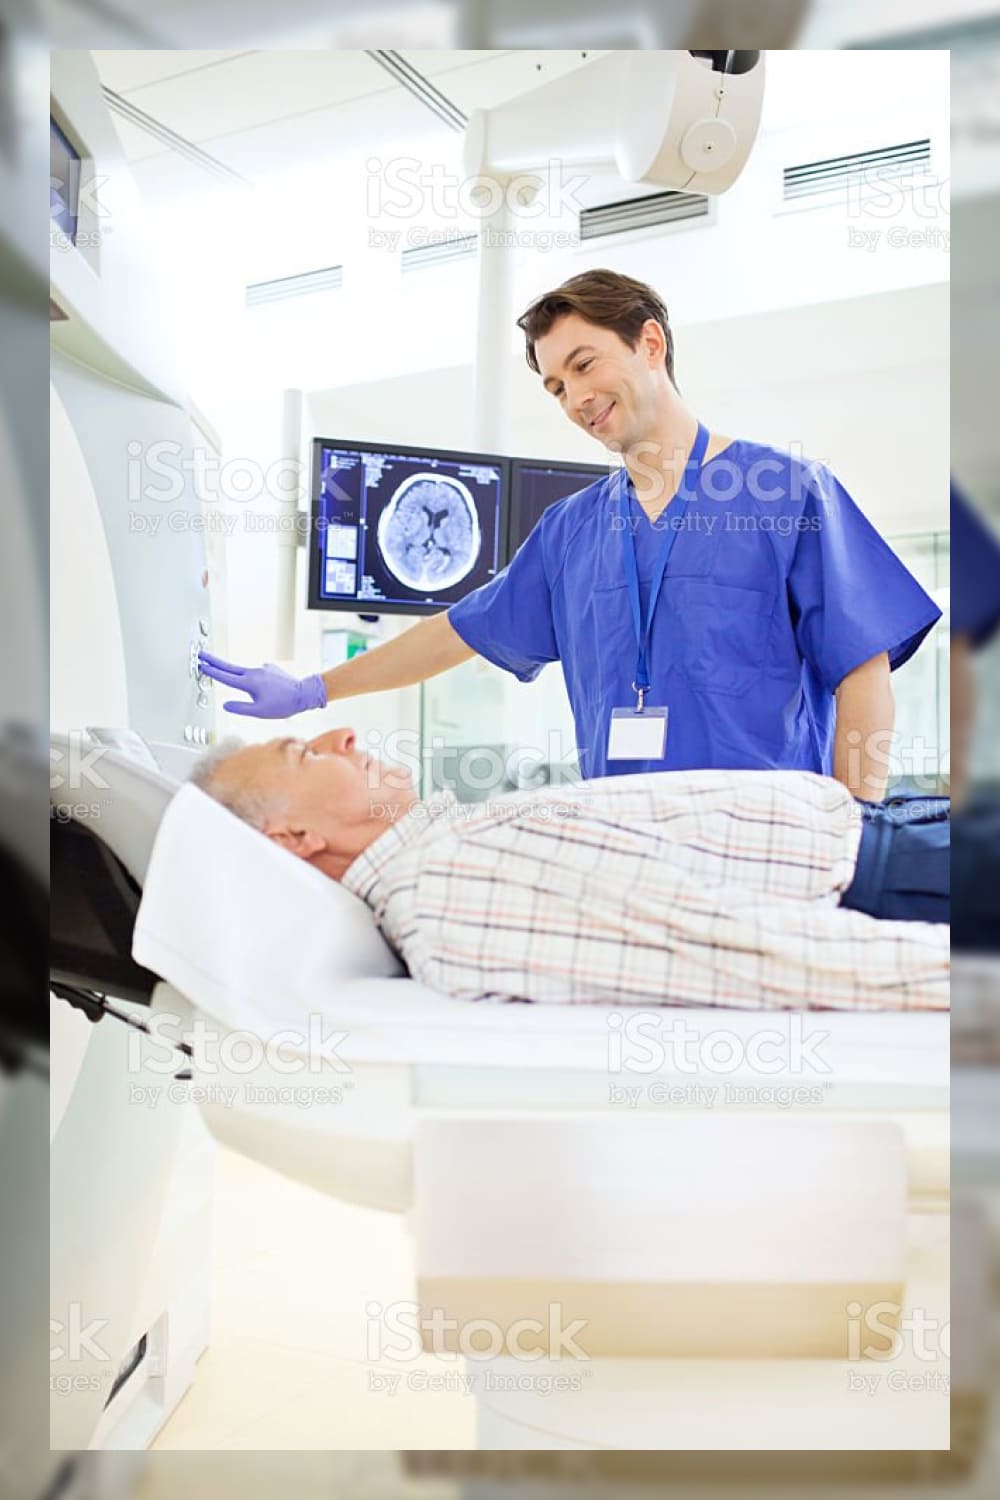 Patient at a computer tomography exam stock photo.